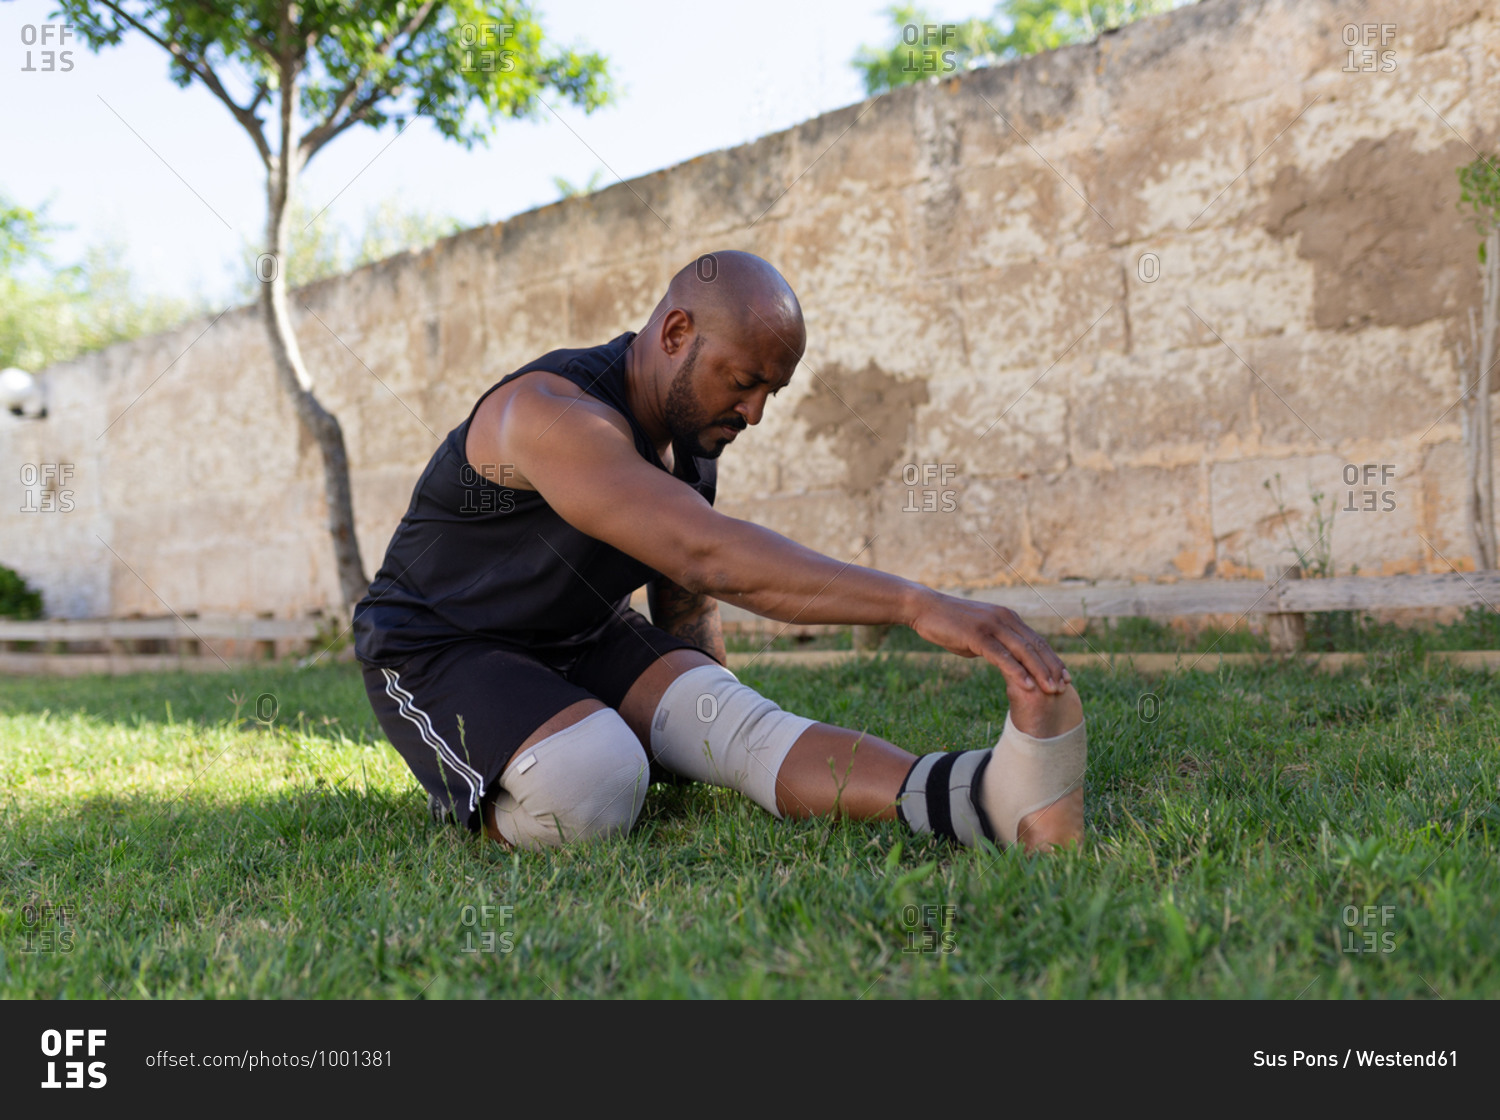 Mature man with shaved head exercising on grassy land against wall in yard